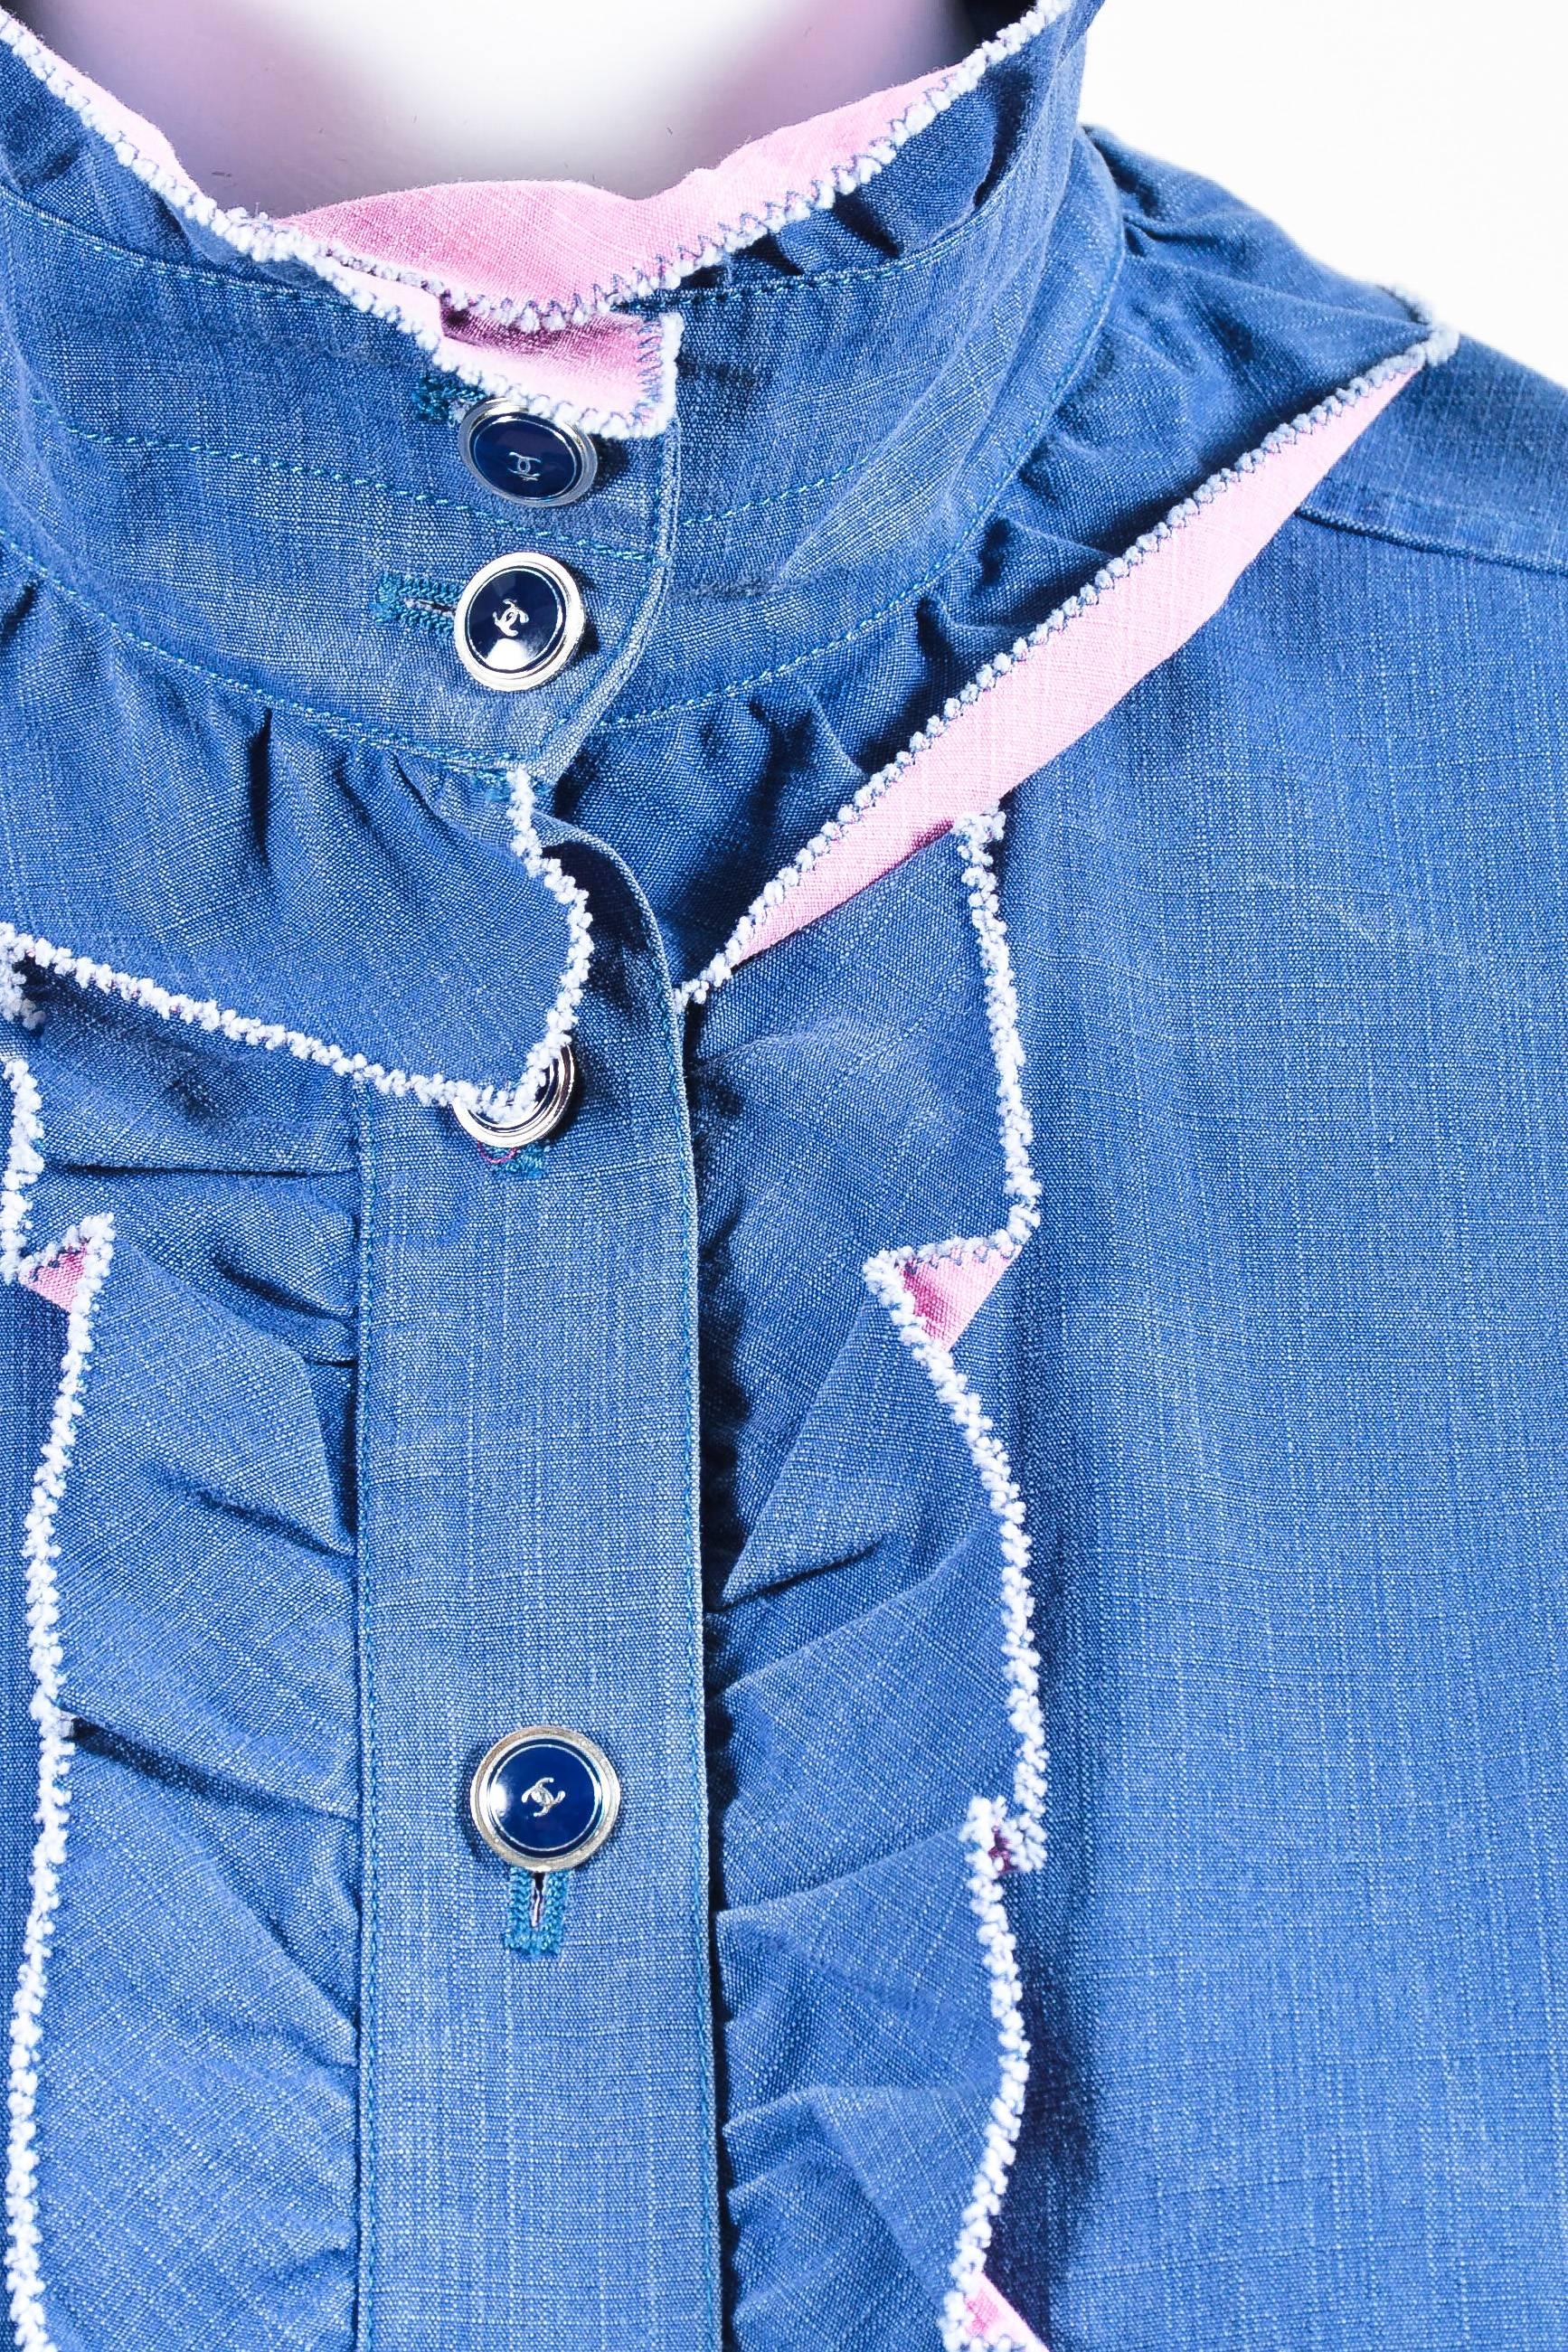 Chanel 07C Blue Pink Cotton Denim Ruffle Frayed Edge Button Up A Line Top SZ 42 In Excellent Condition For Sale In Chicago, IL